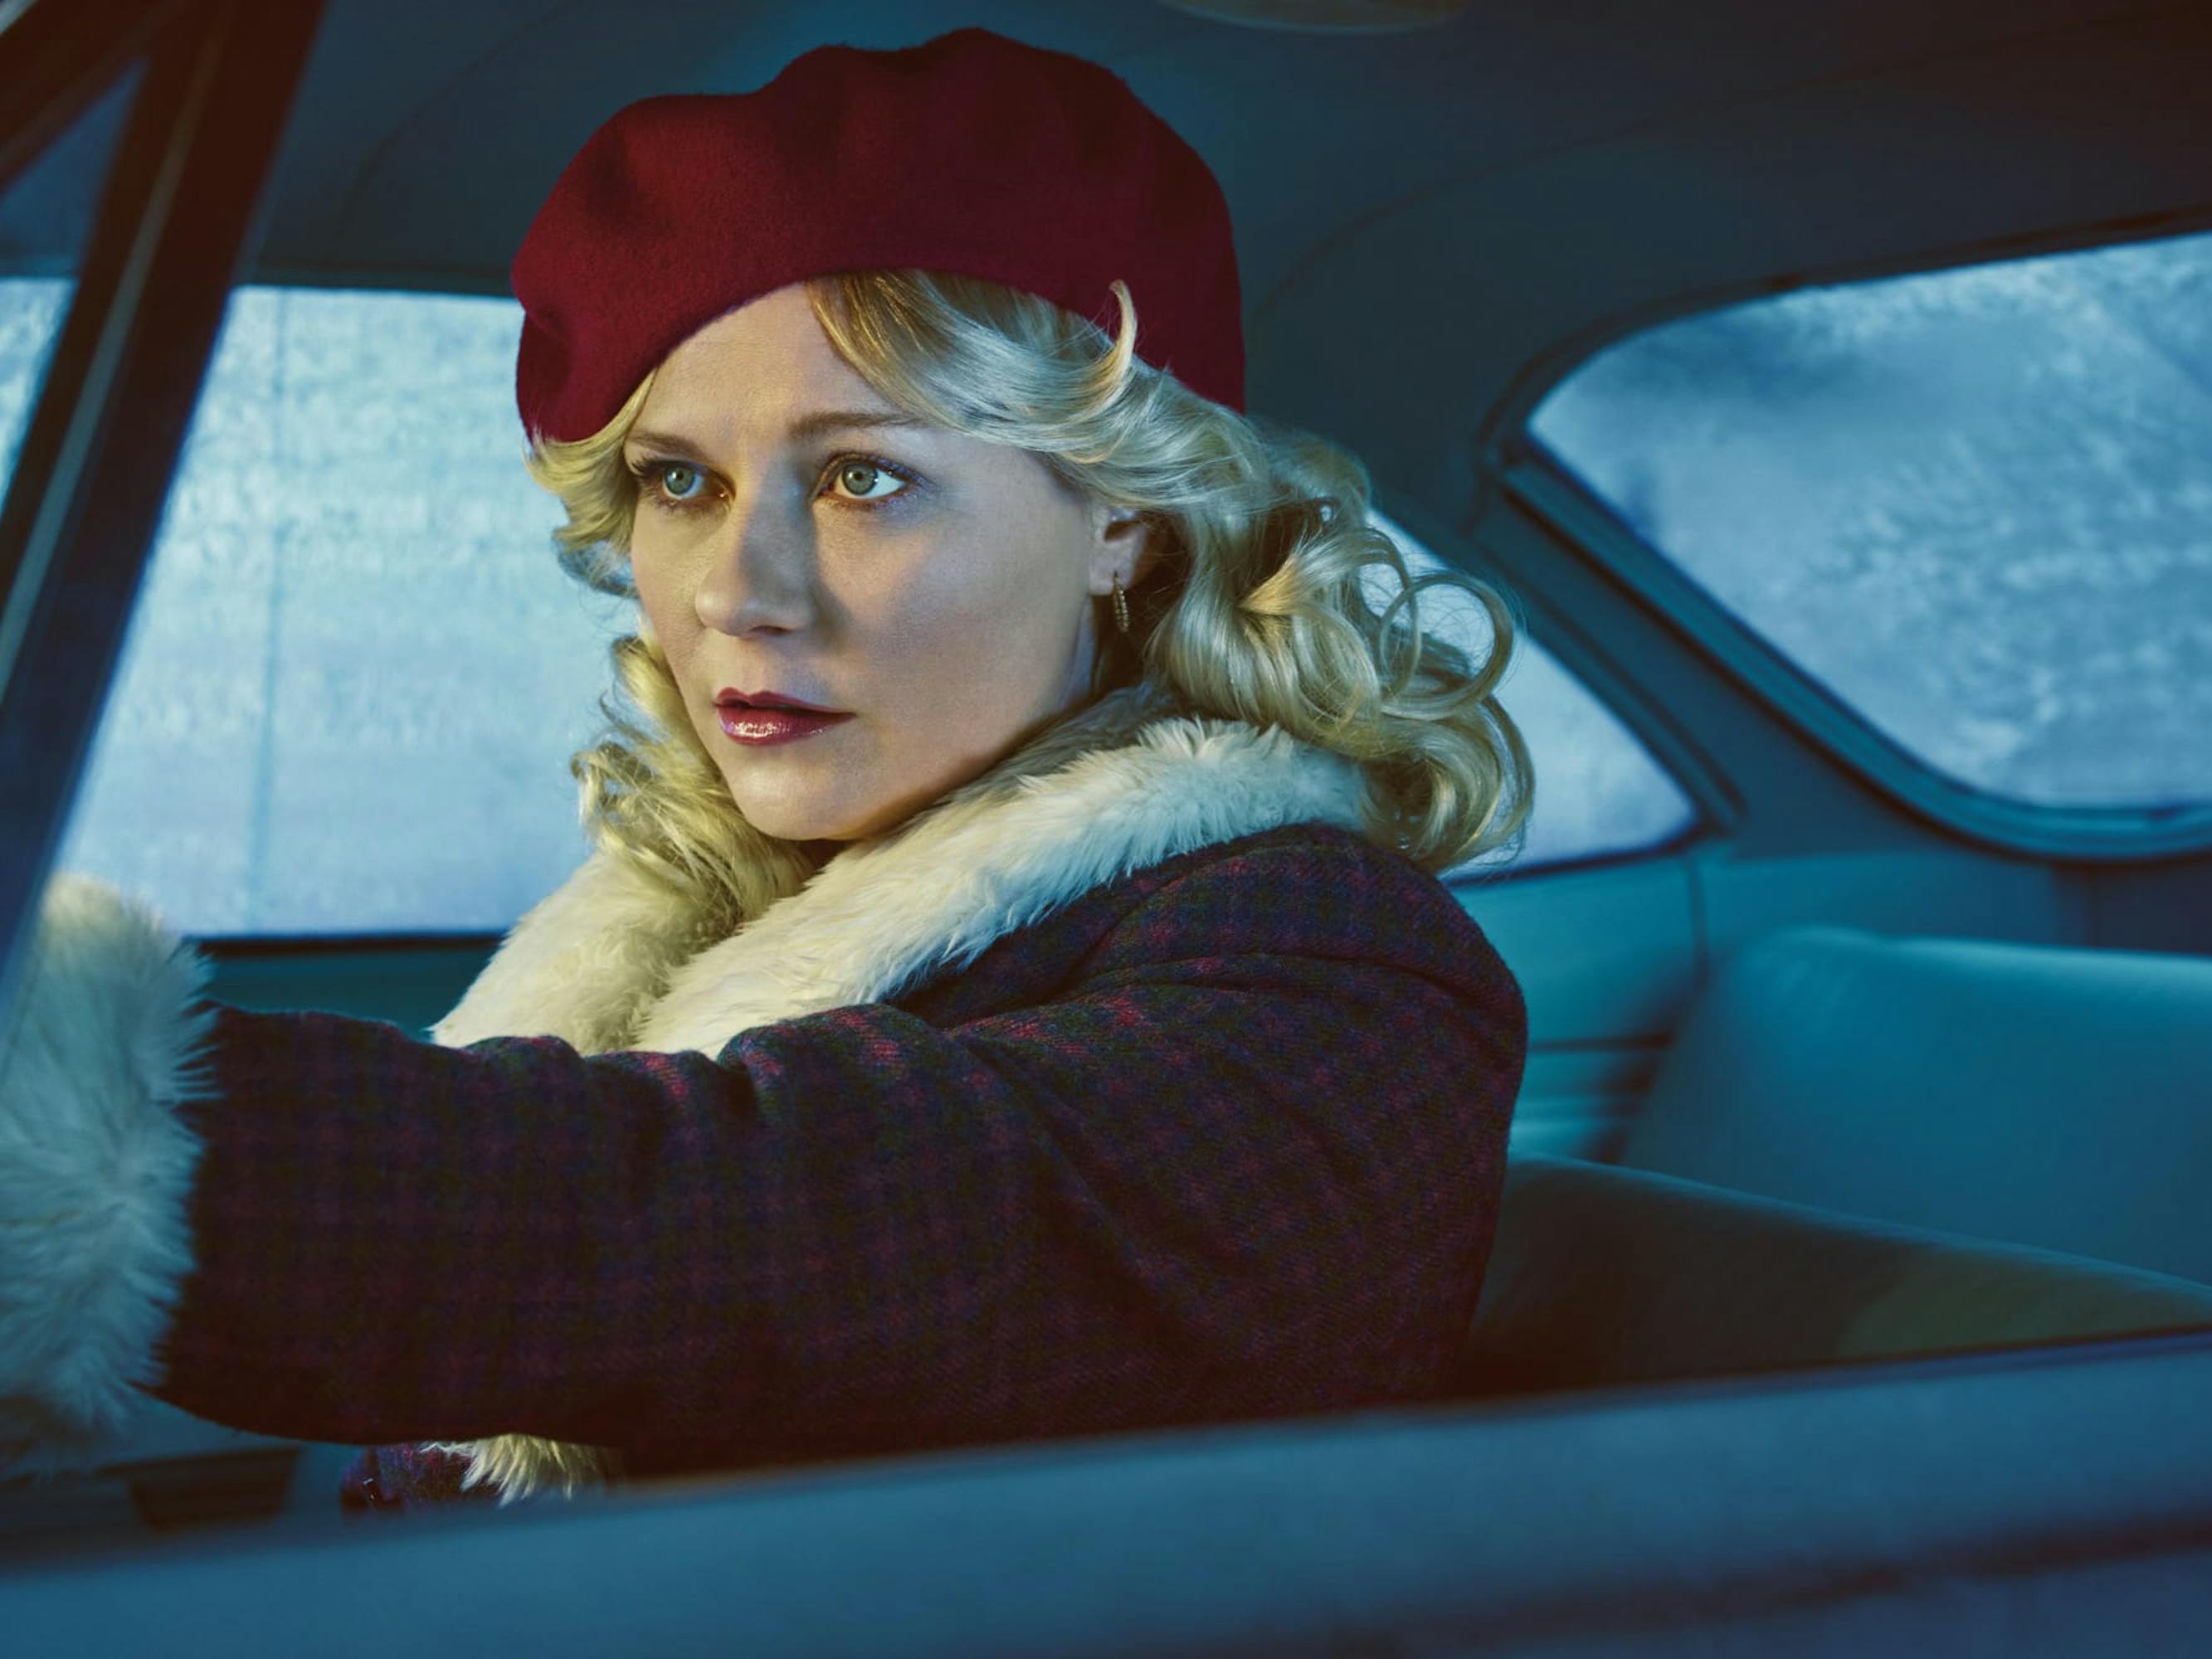 Peggy (Kirsten Dunst) drives a car wearing a fabulous plaid coat trimmed with white fur and a red beret.